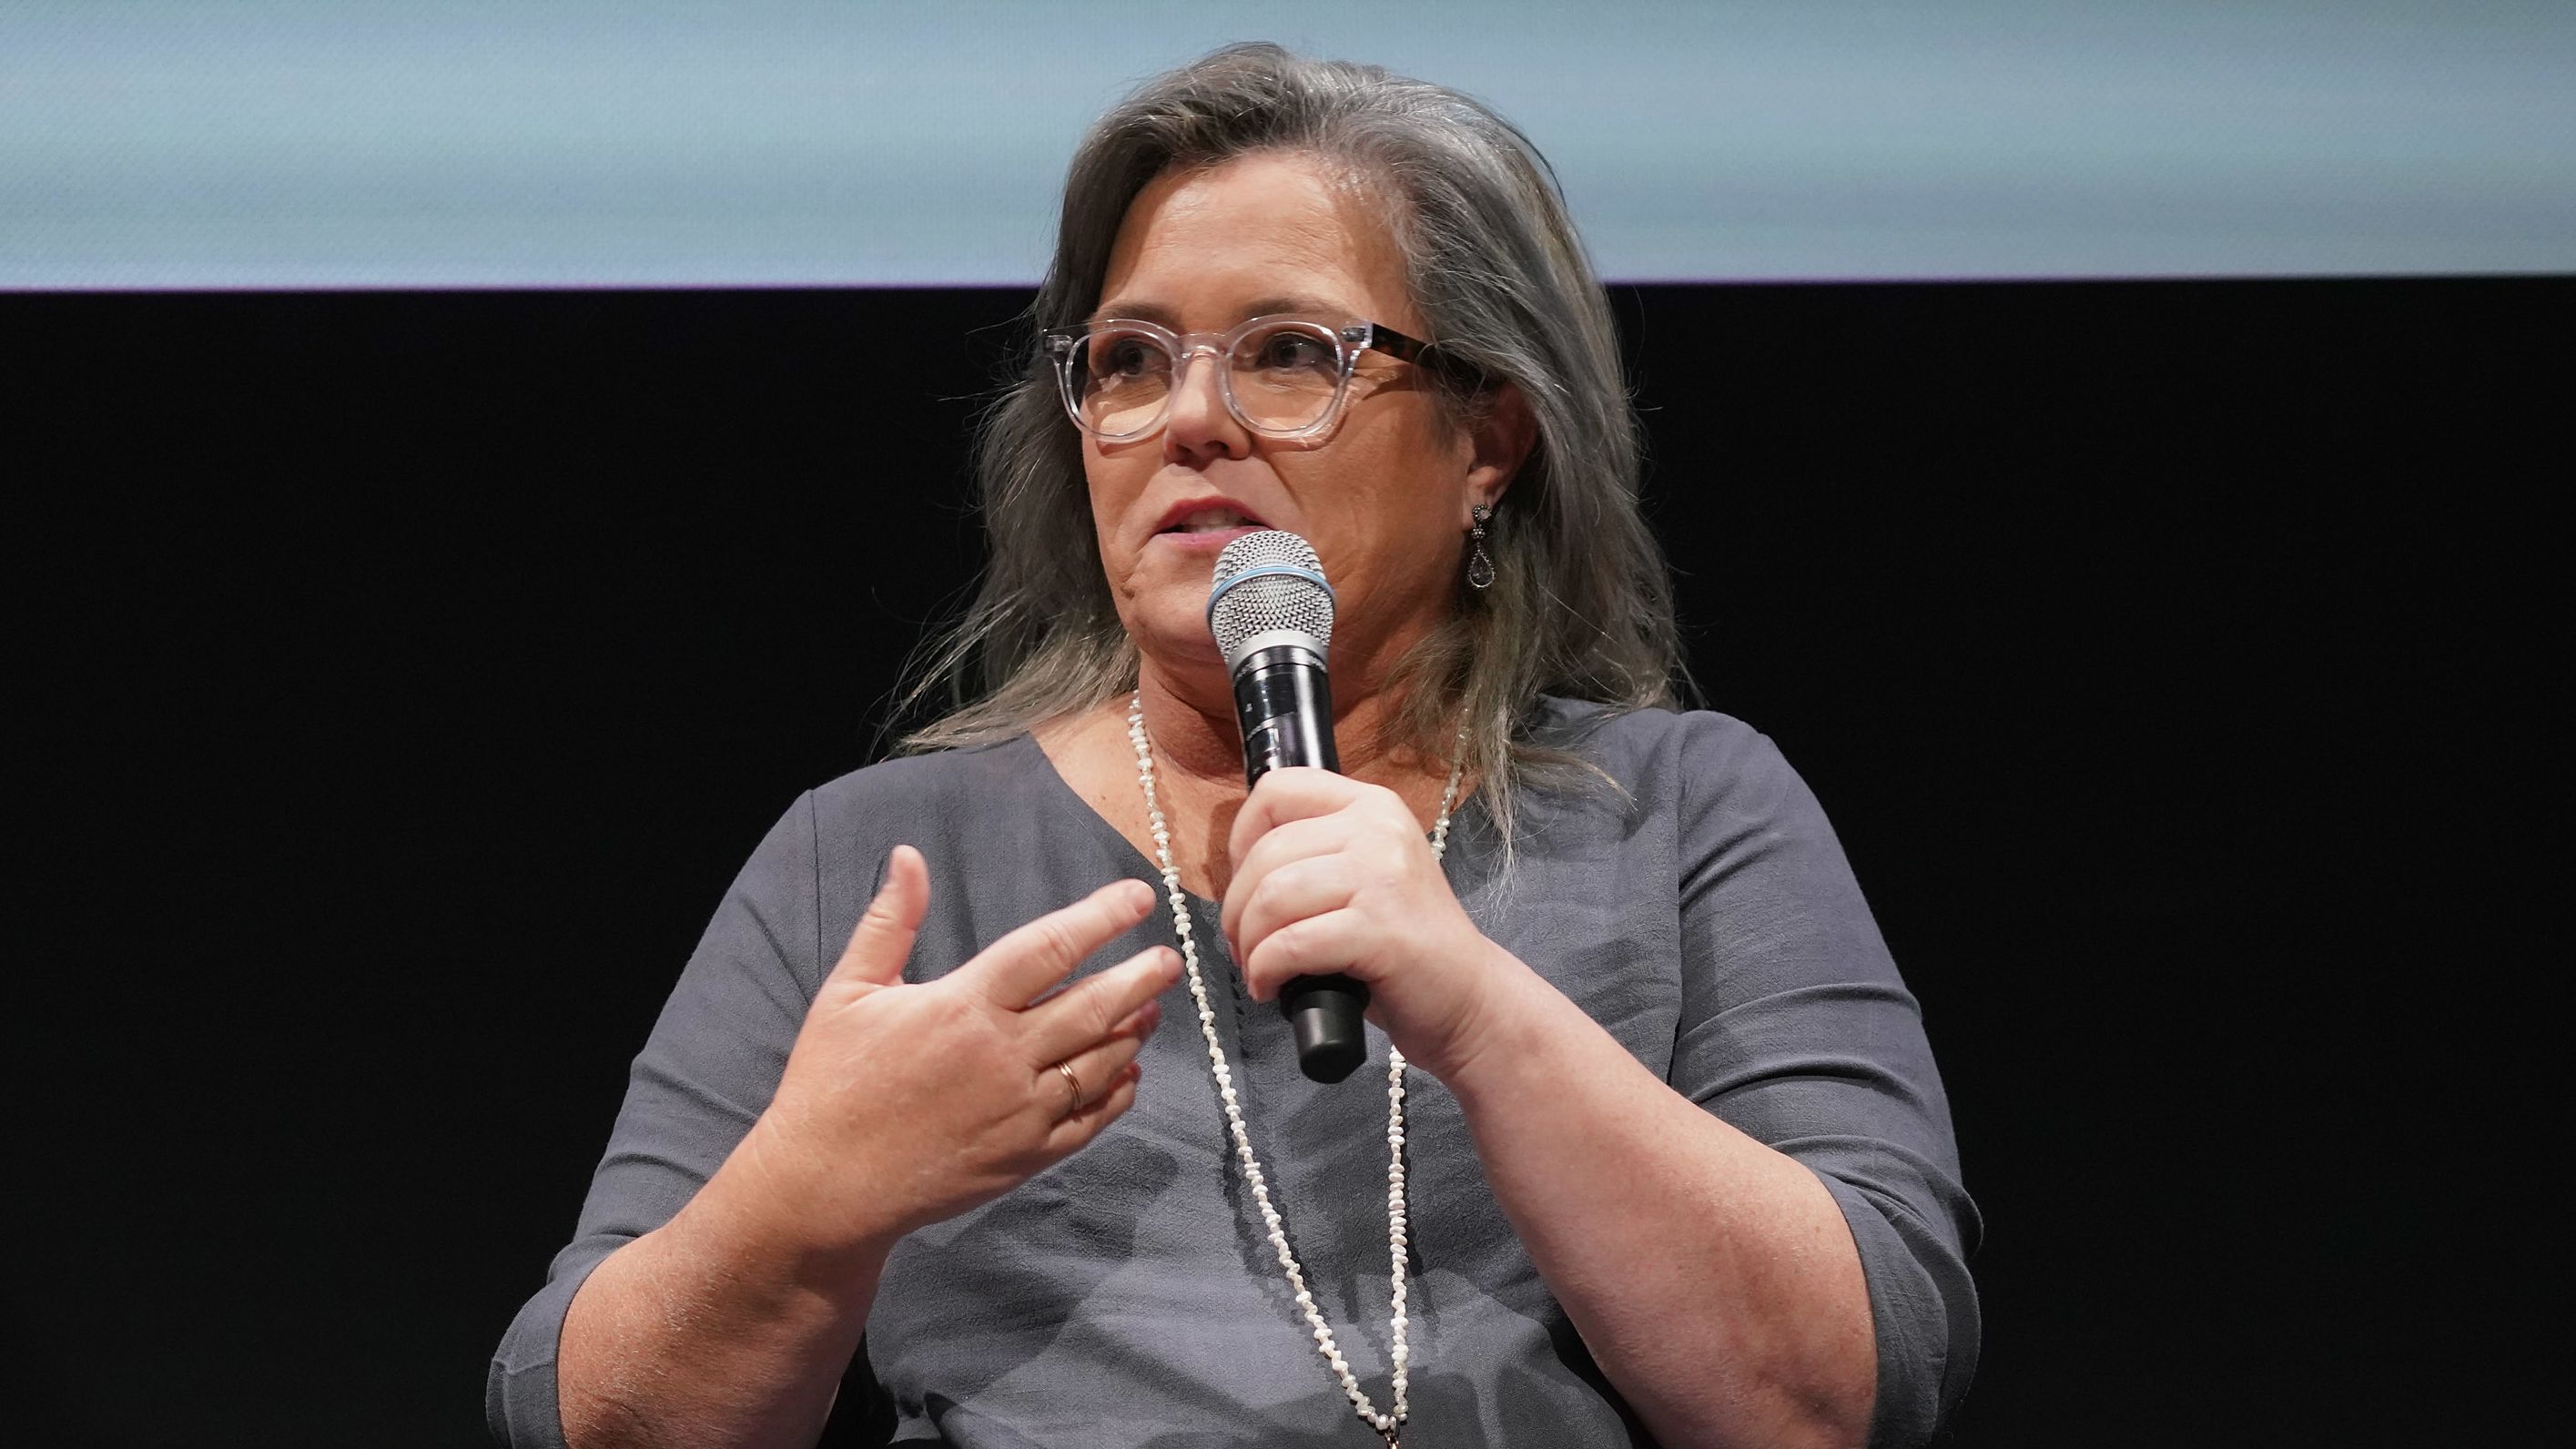 Rosie O'Donnell will host a special to raise money for artists struggling during the coronavirus pandemic. 